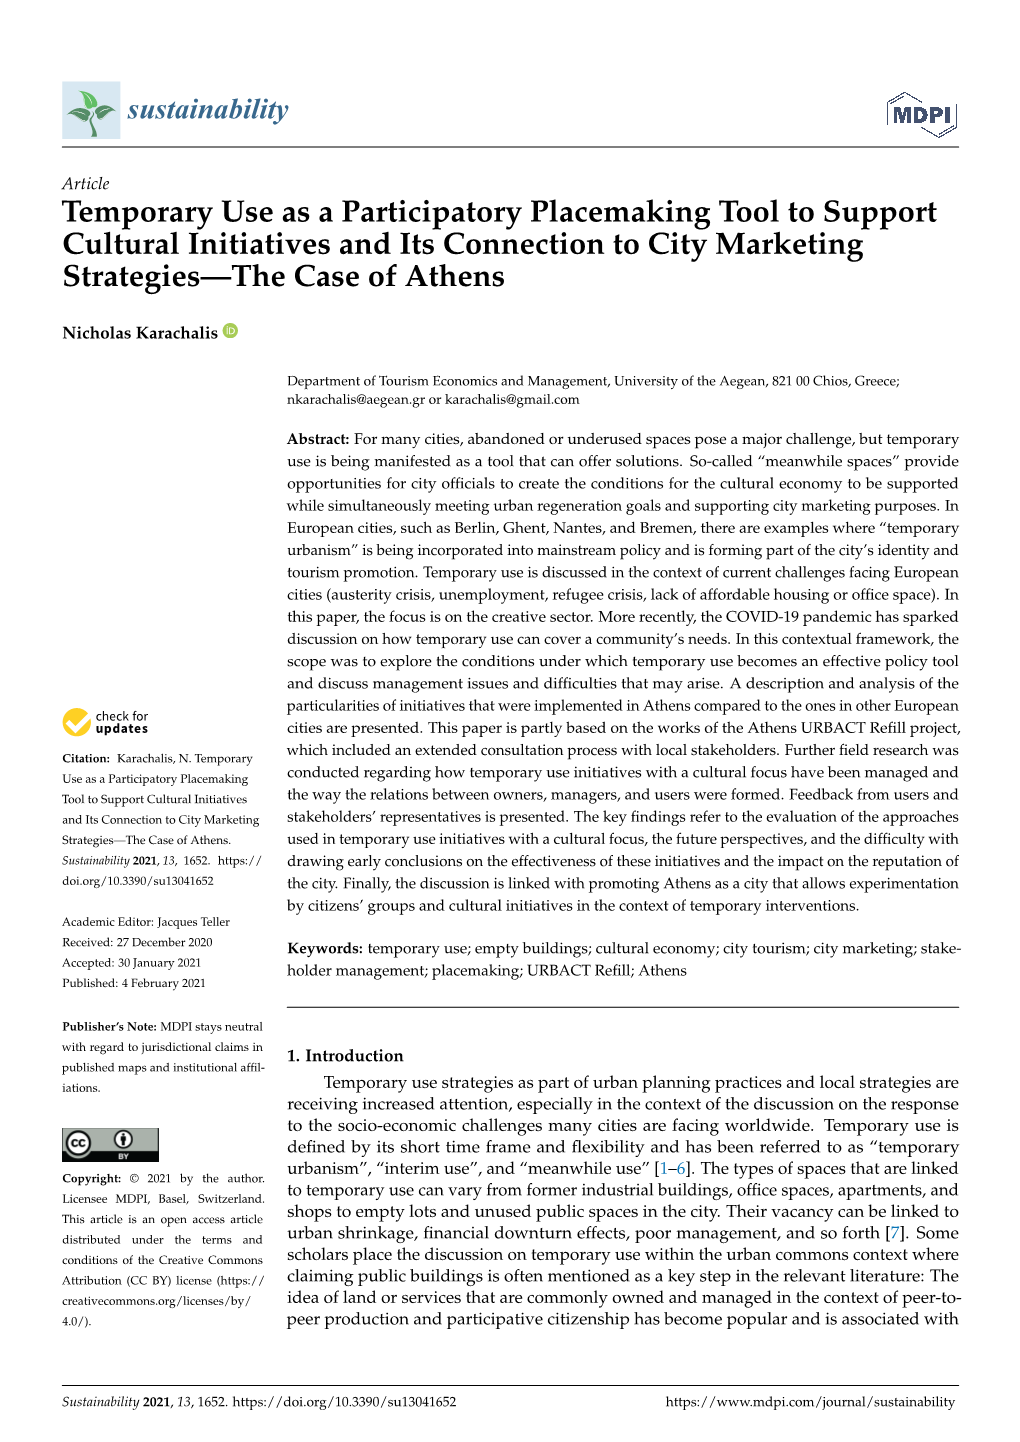 Temporary Use As a Participatory Placemaking Tool to Support Cultural Initiatives and Its Connection to City Marketing Strategies—The Case of Athens